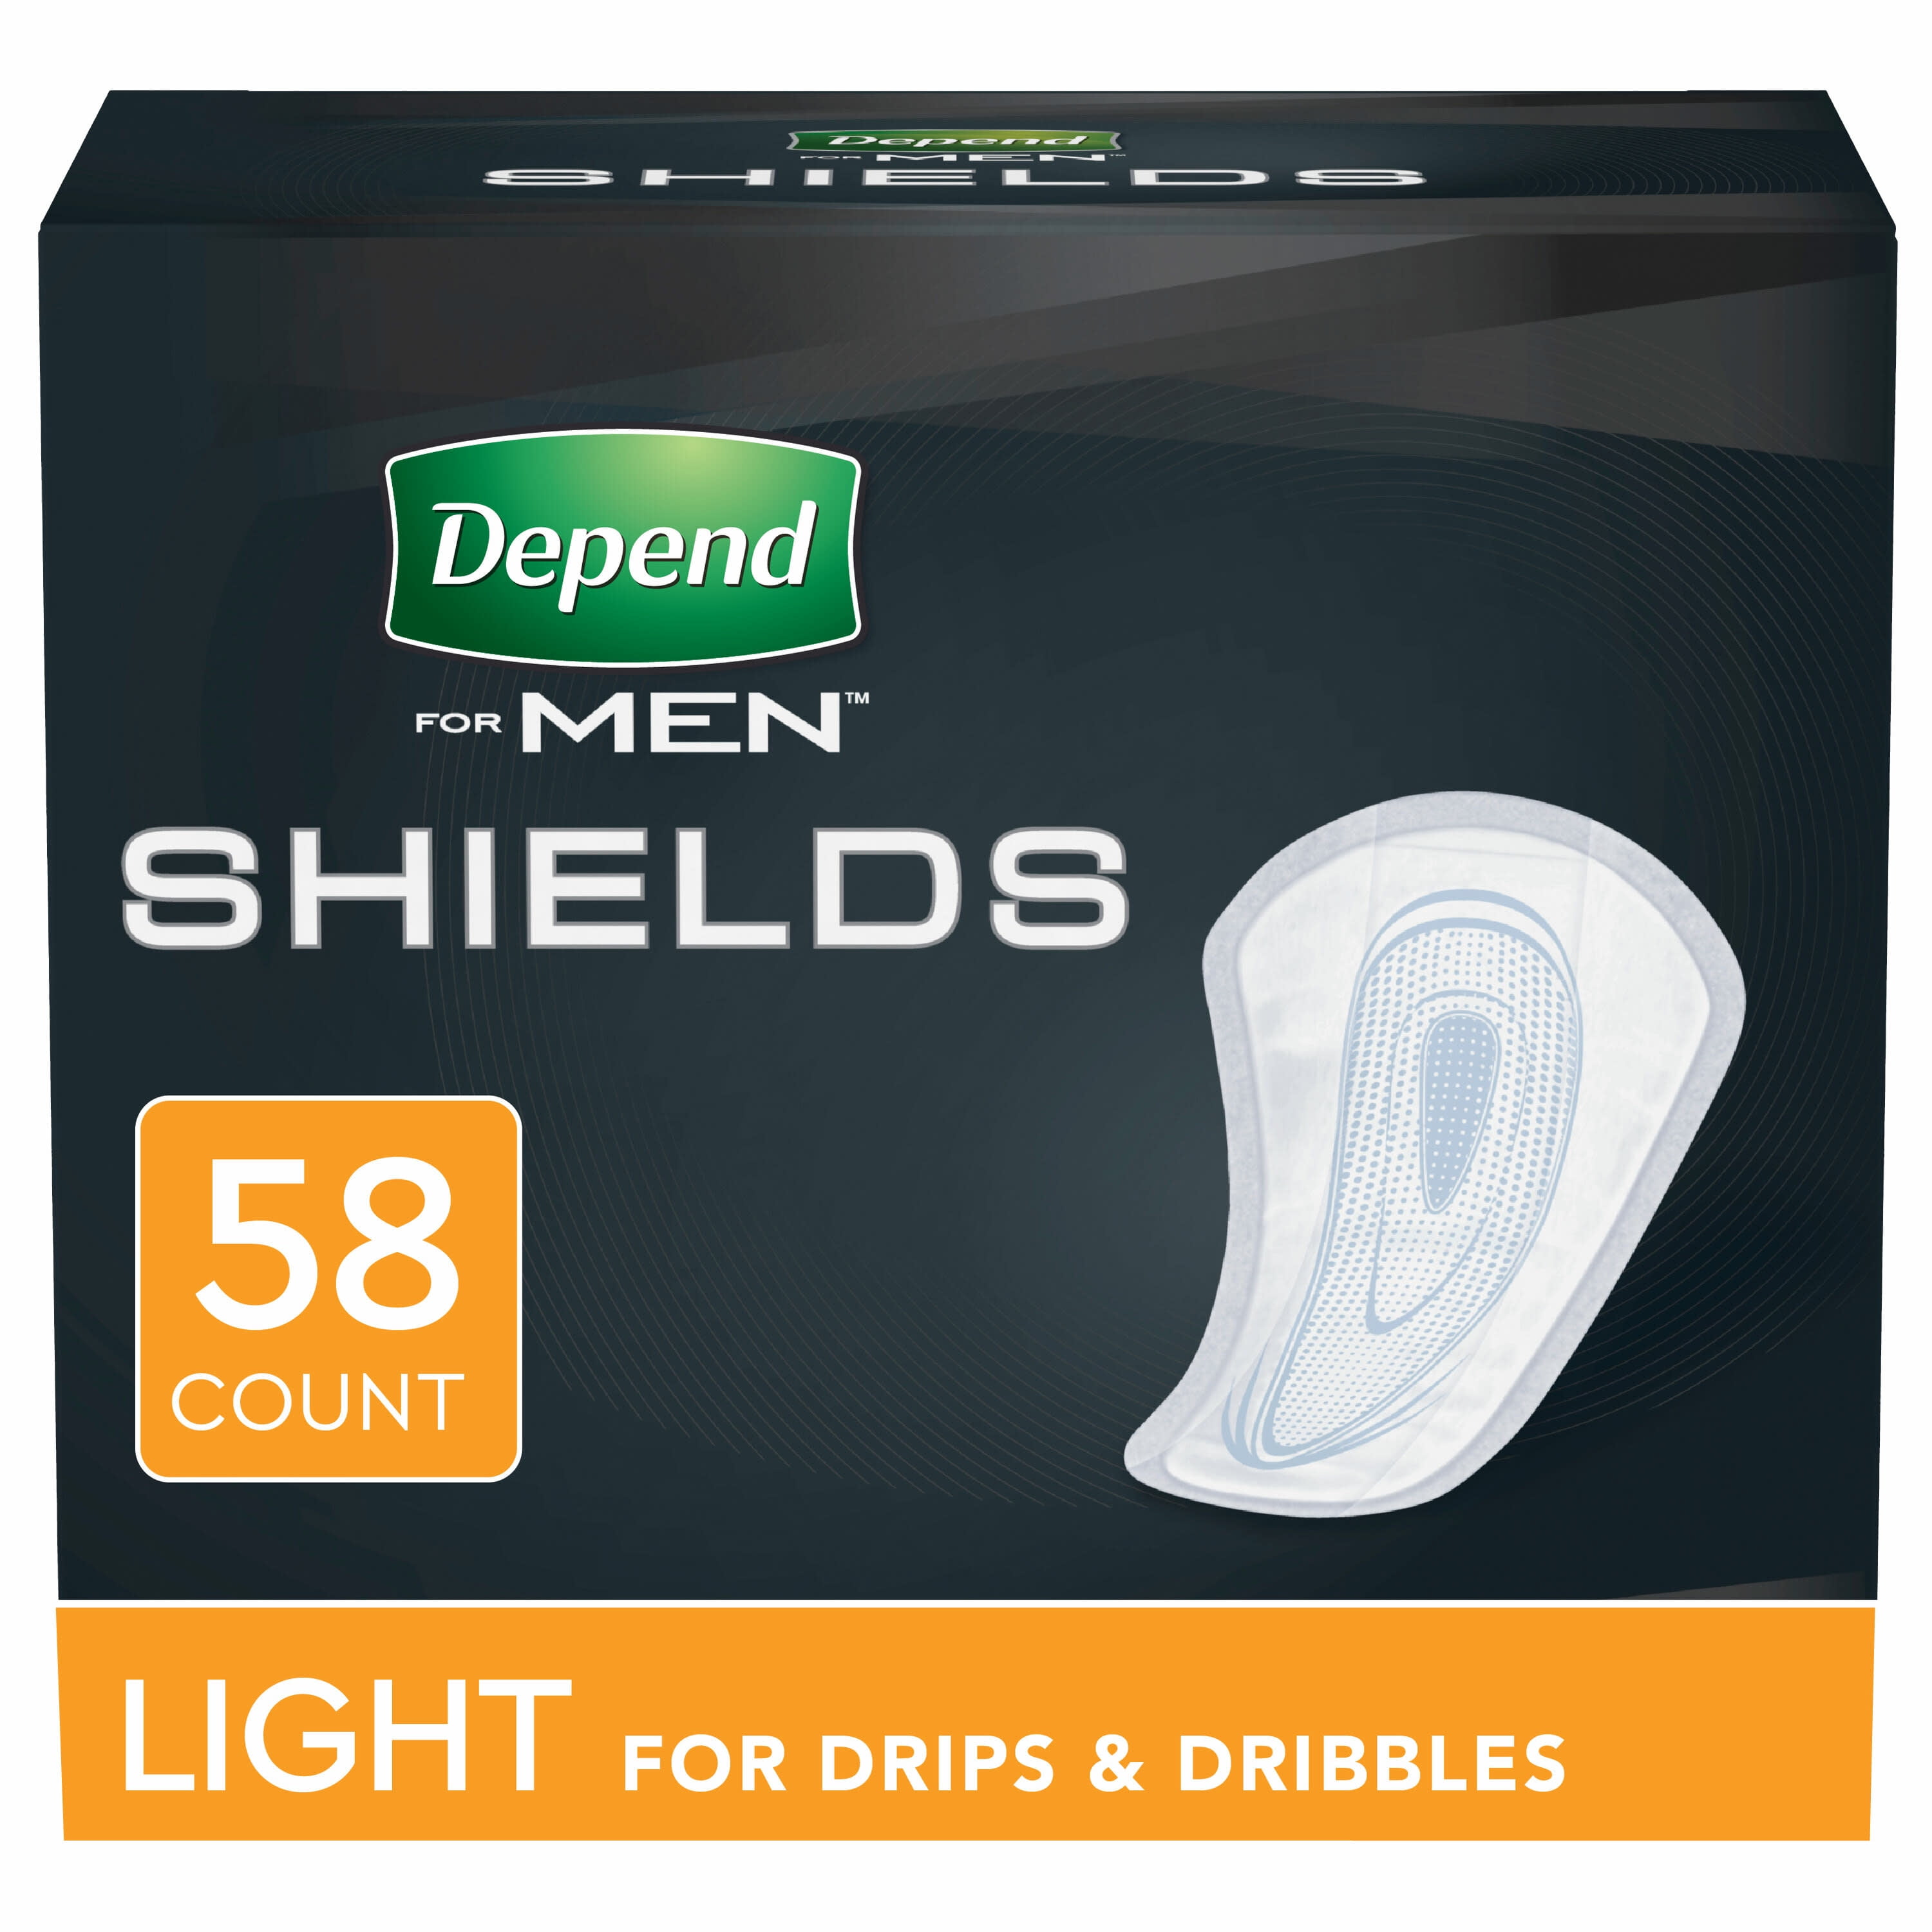 Depend Shield Incontinence Pads for Men Bladder Control Pads, Light, 58ct